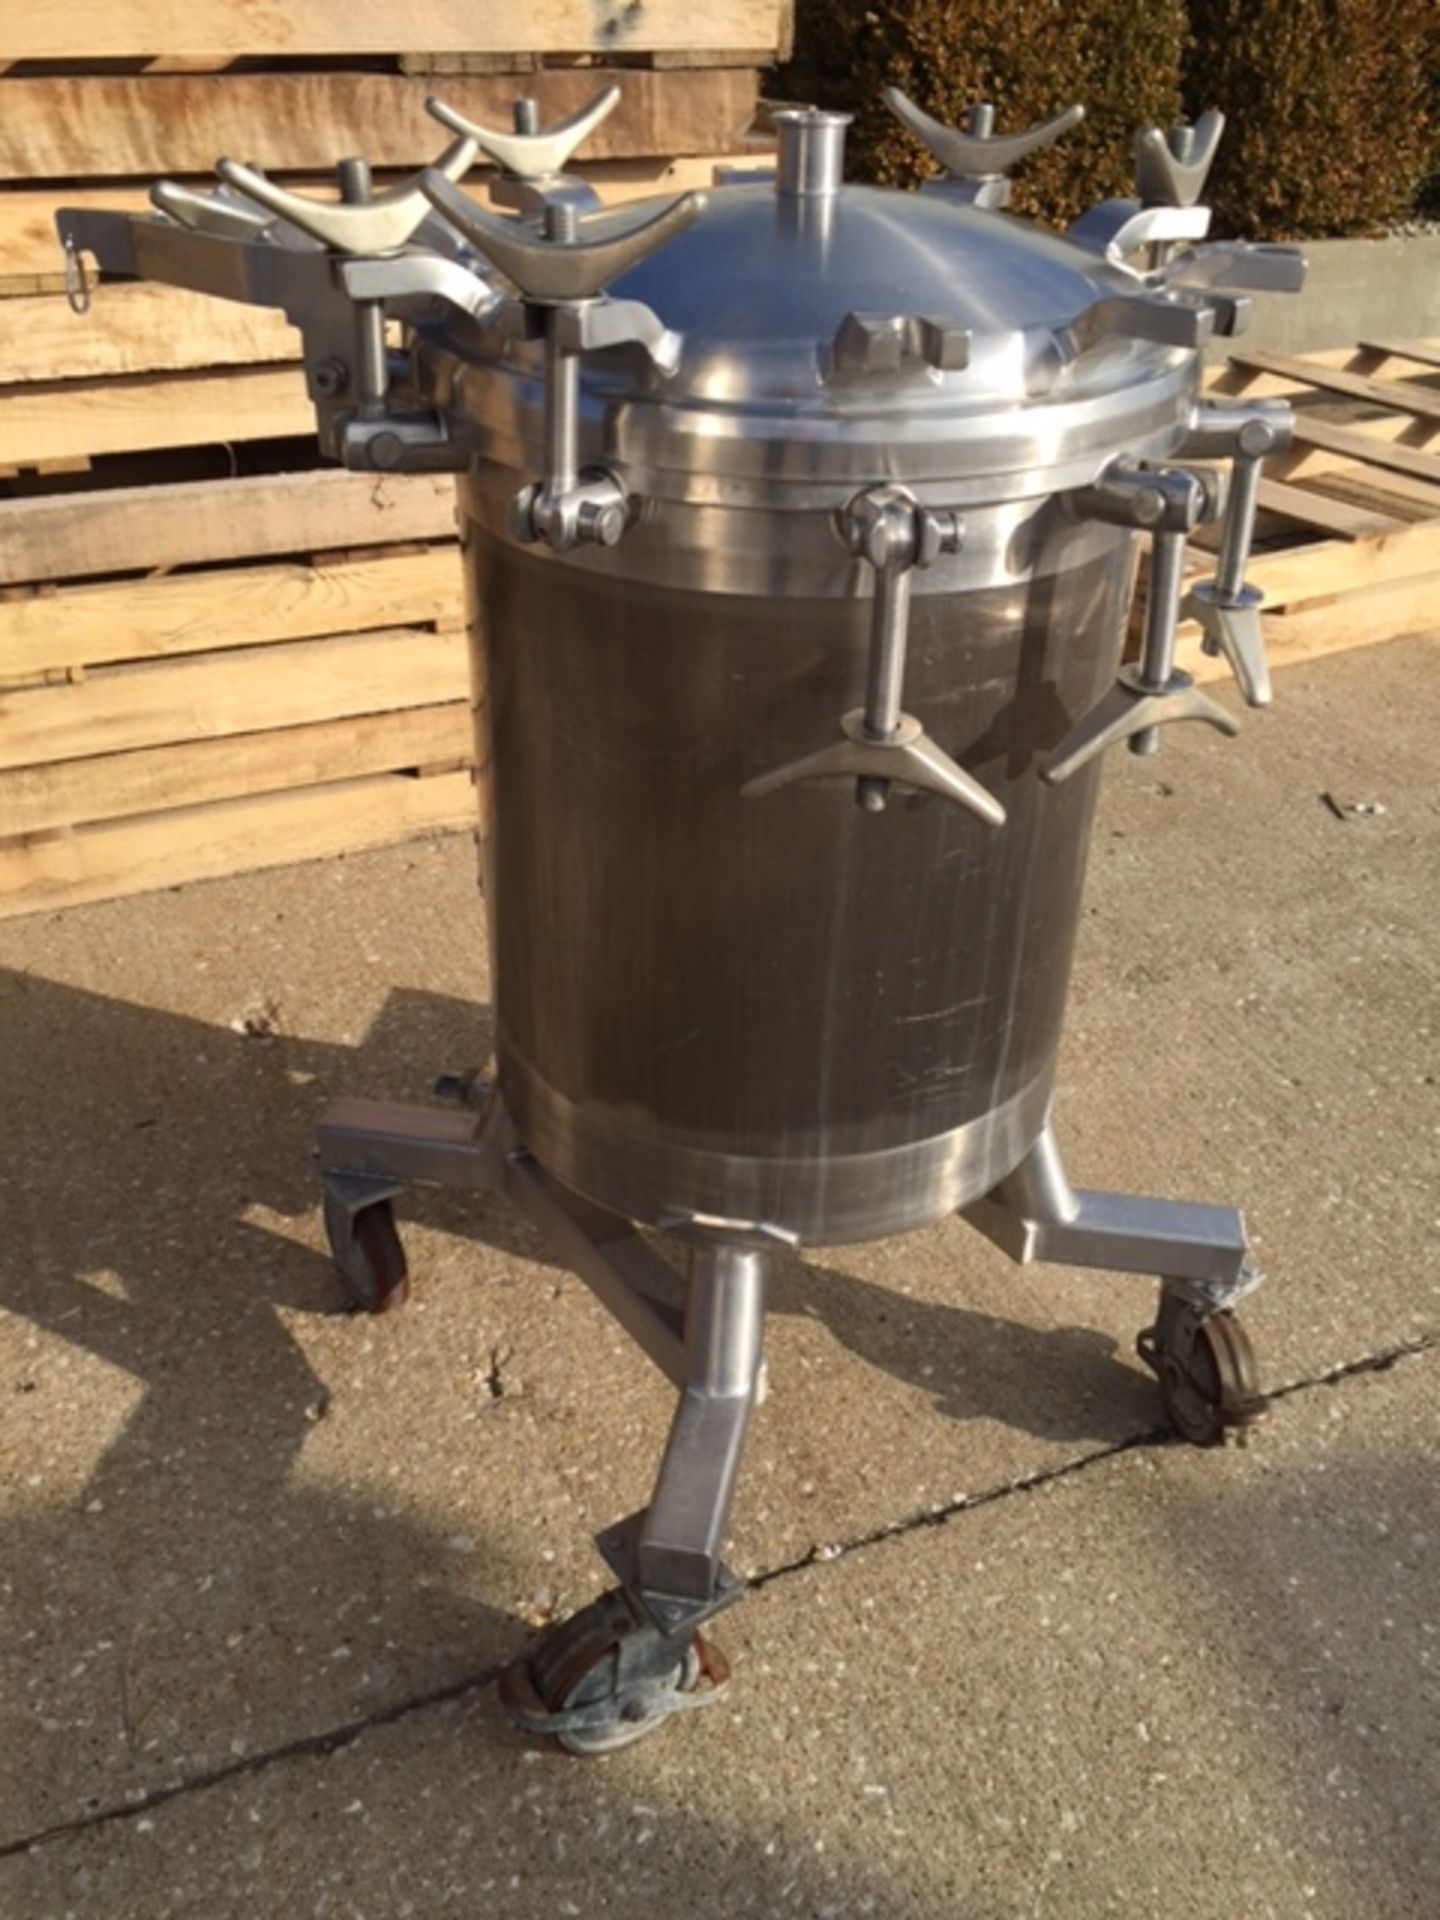 Pressure Tank, 150 Liter, 316 SS, 100 PSIG at 100 Deg. F, Certified by Precision Stainless Inc.